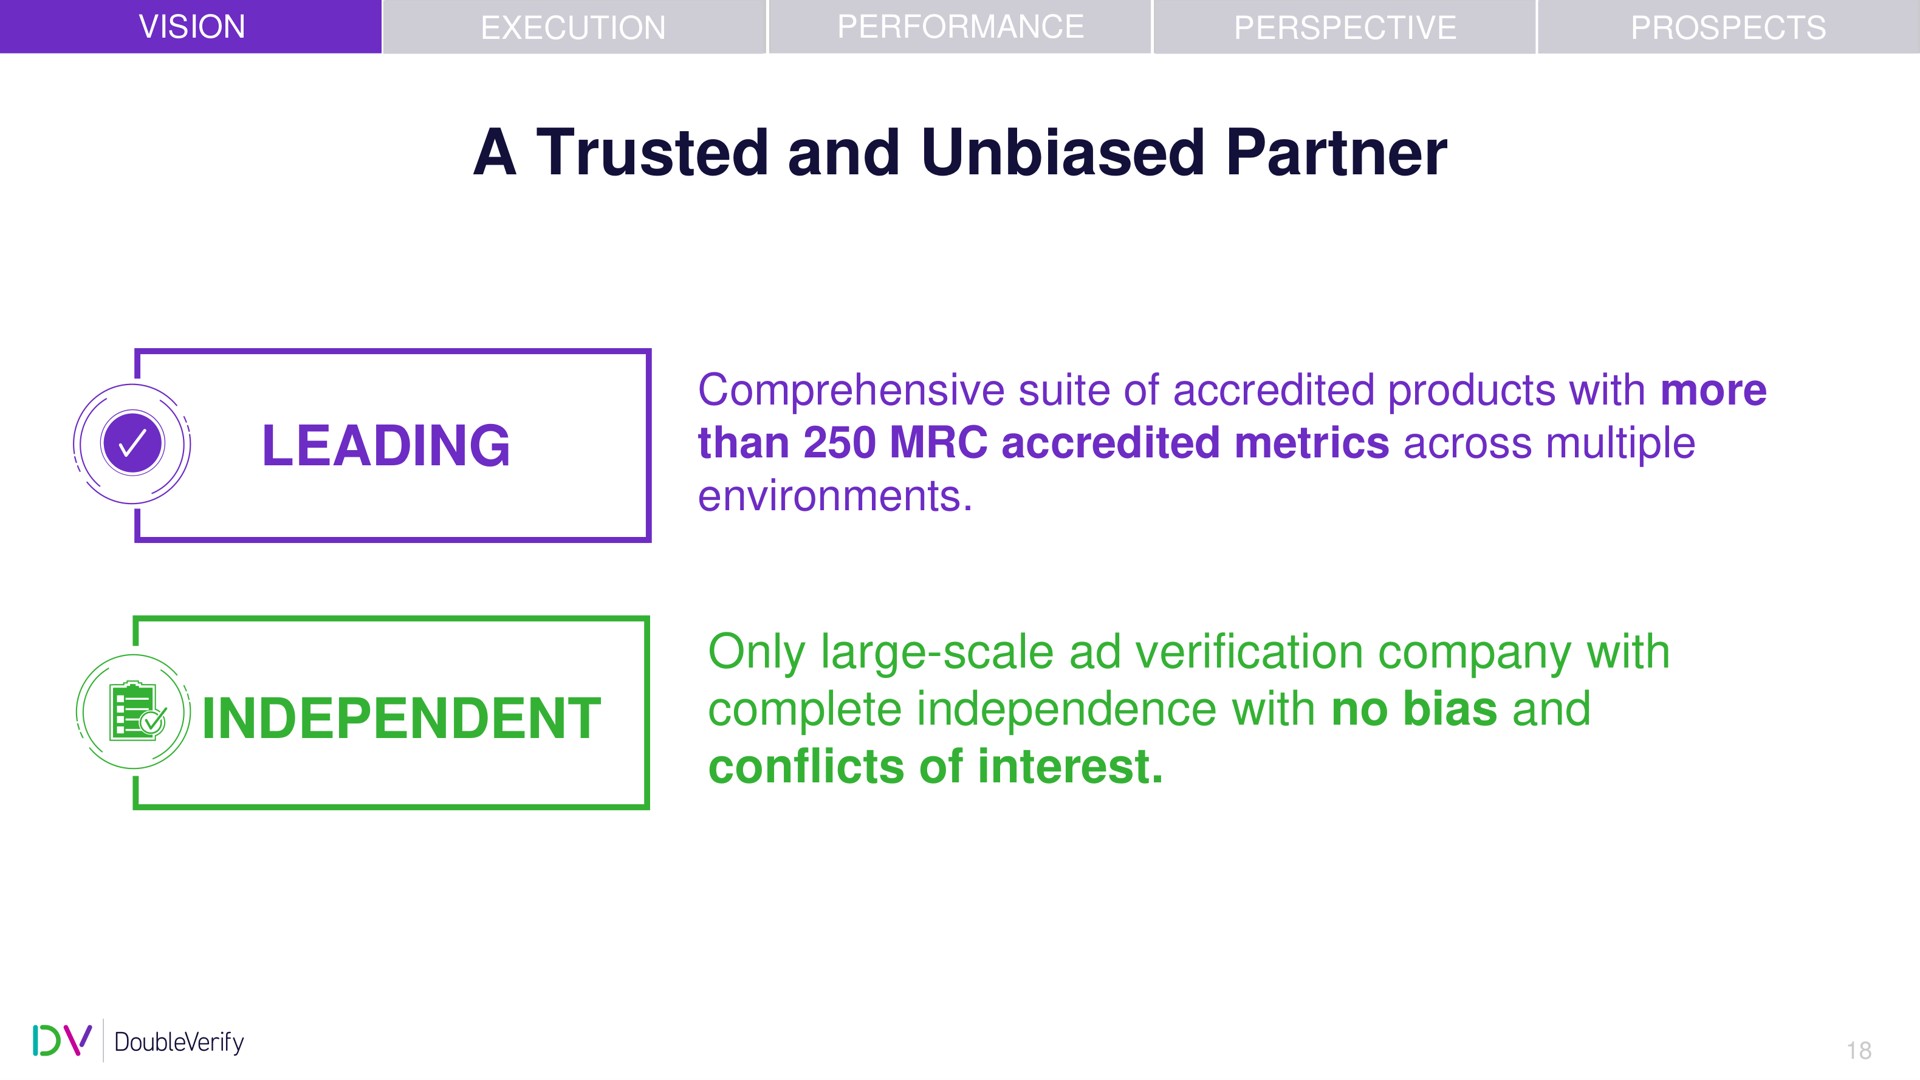 a trusted and unbiased partner leading comprehensive suite of accredited products with more than accredited metrics across multiple environments independent only large scale verification company with complete independence with no bias and conflicts of interest | DoubleVerify